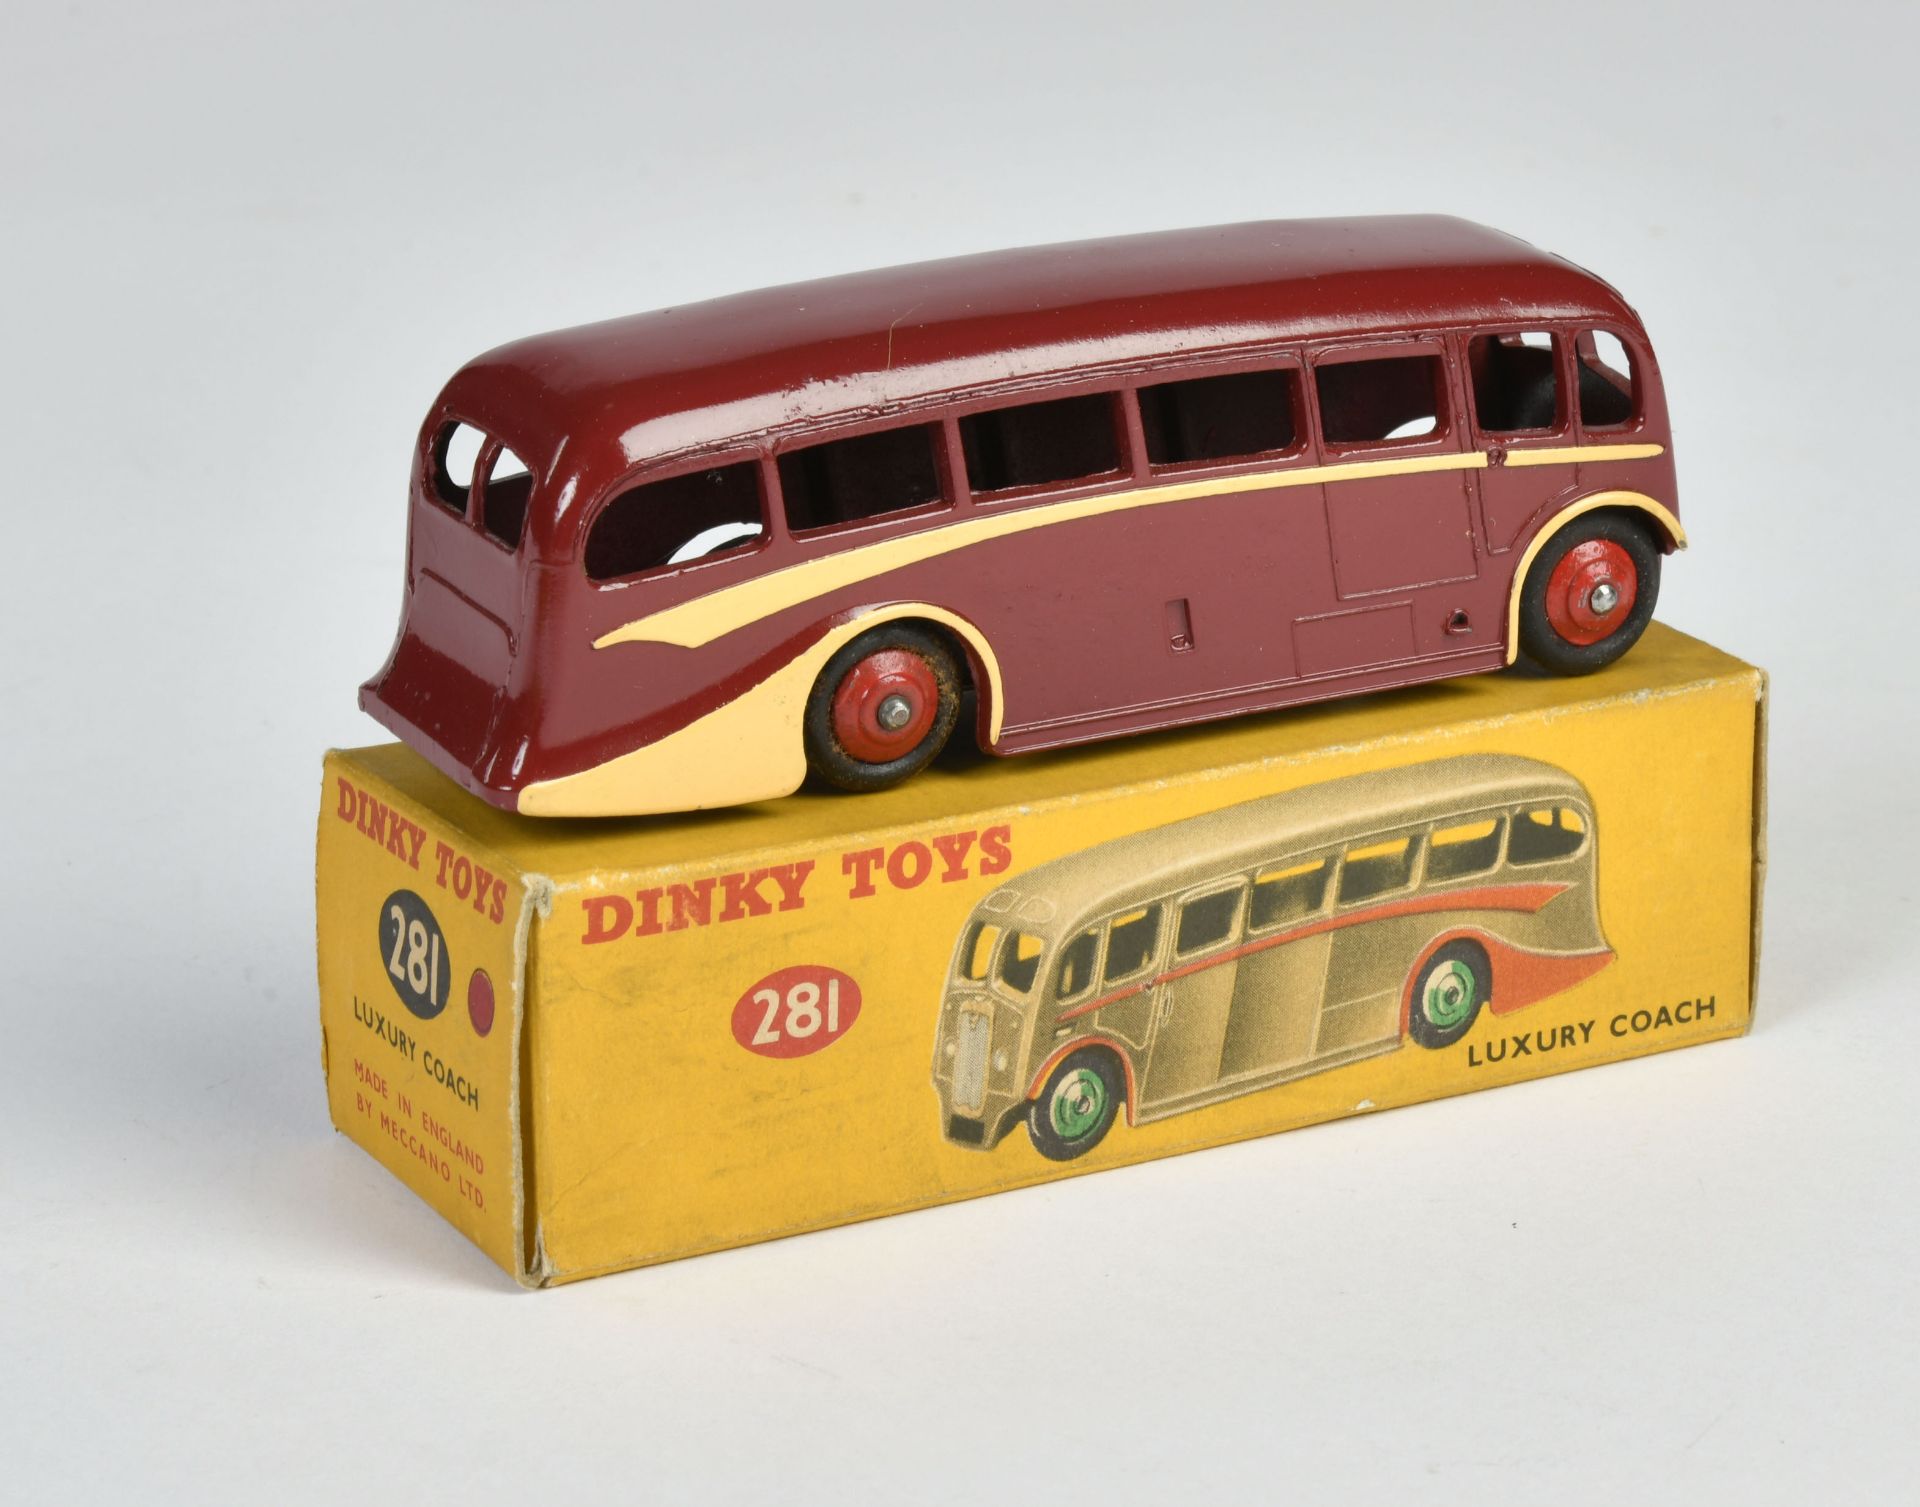 Dinky Toys, 281 Luxury Coach, red, England, 1:43, diecast, box C 1, C 1 - Image 2 of 2